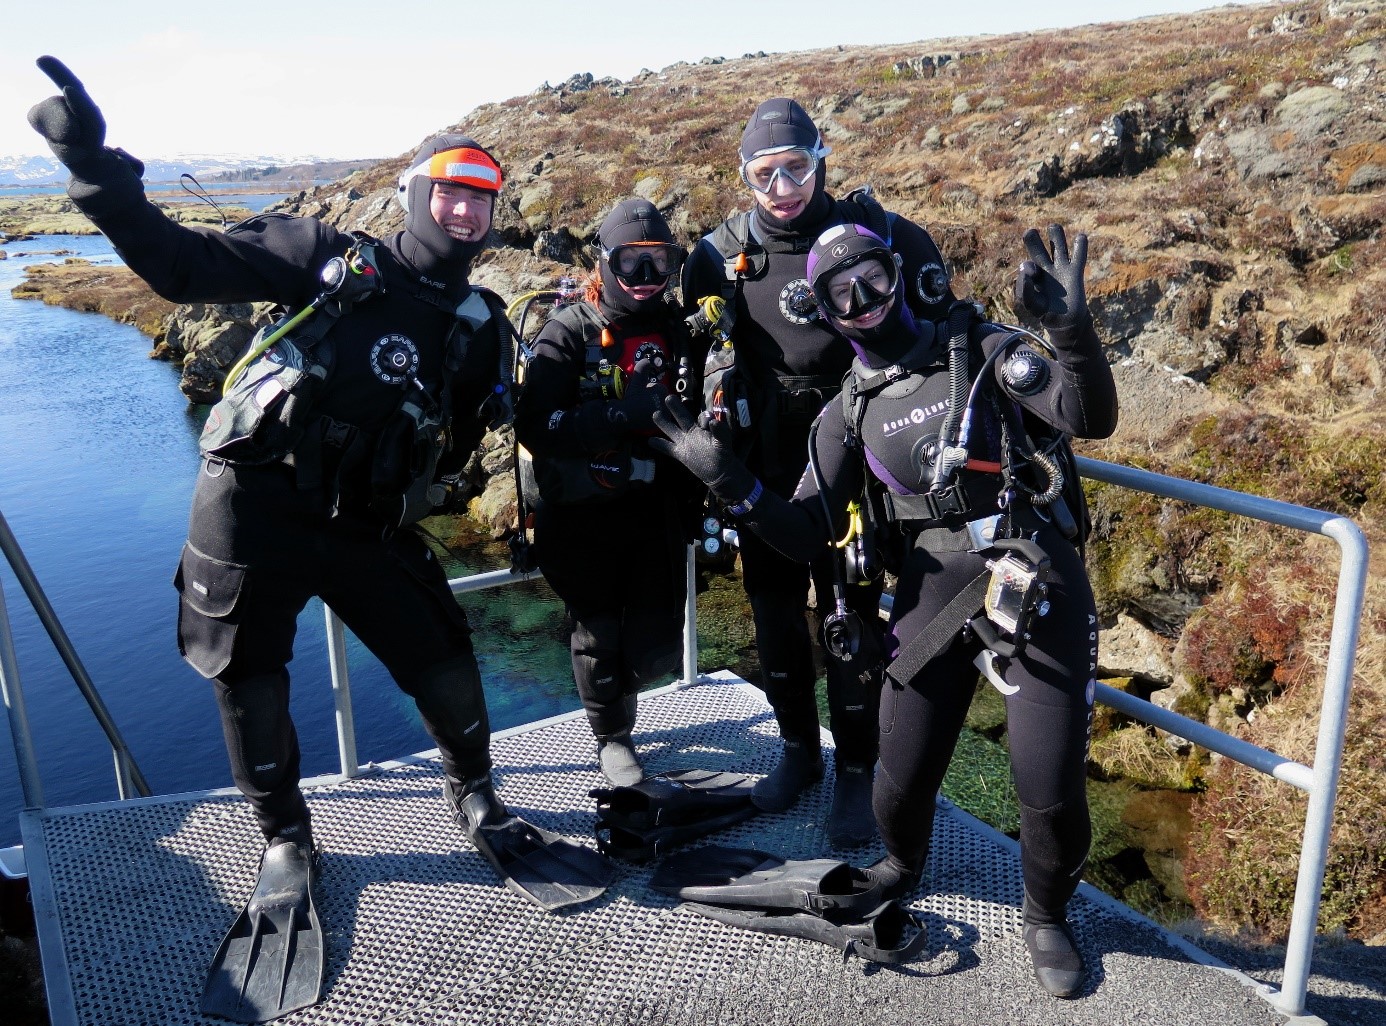 A group of divers on the surface before diving in dry suits on a lake in the mountains